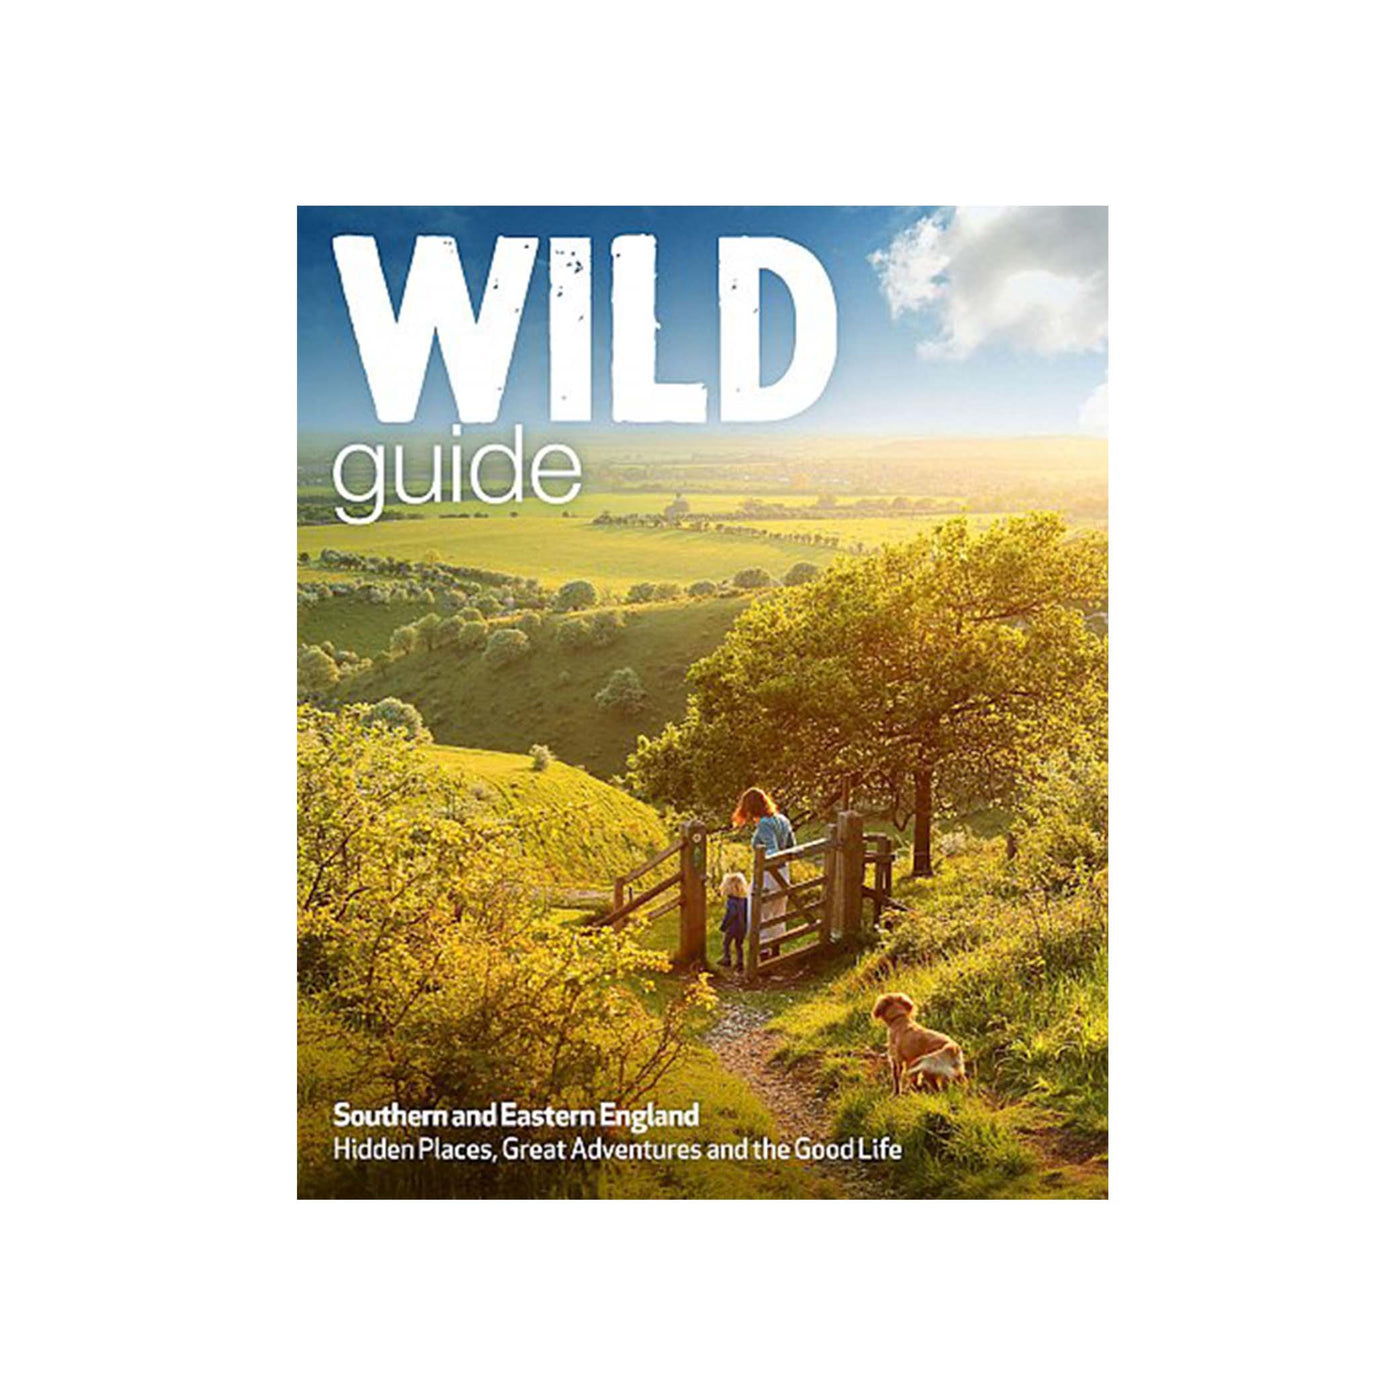 Wild Guide to London & South East (Southern and Eastern England) Book